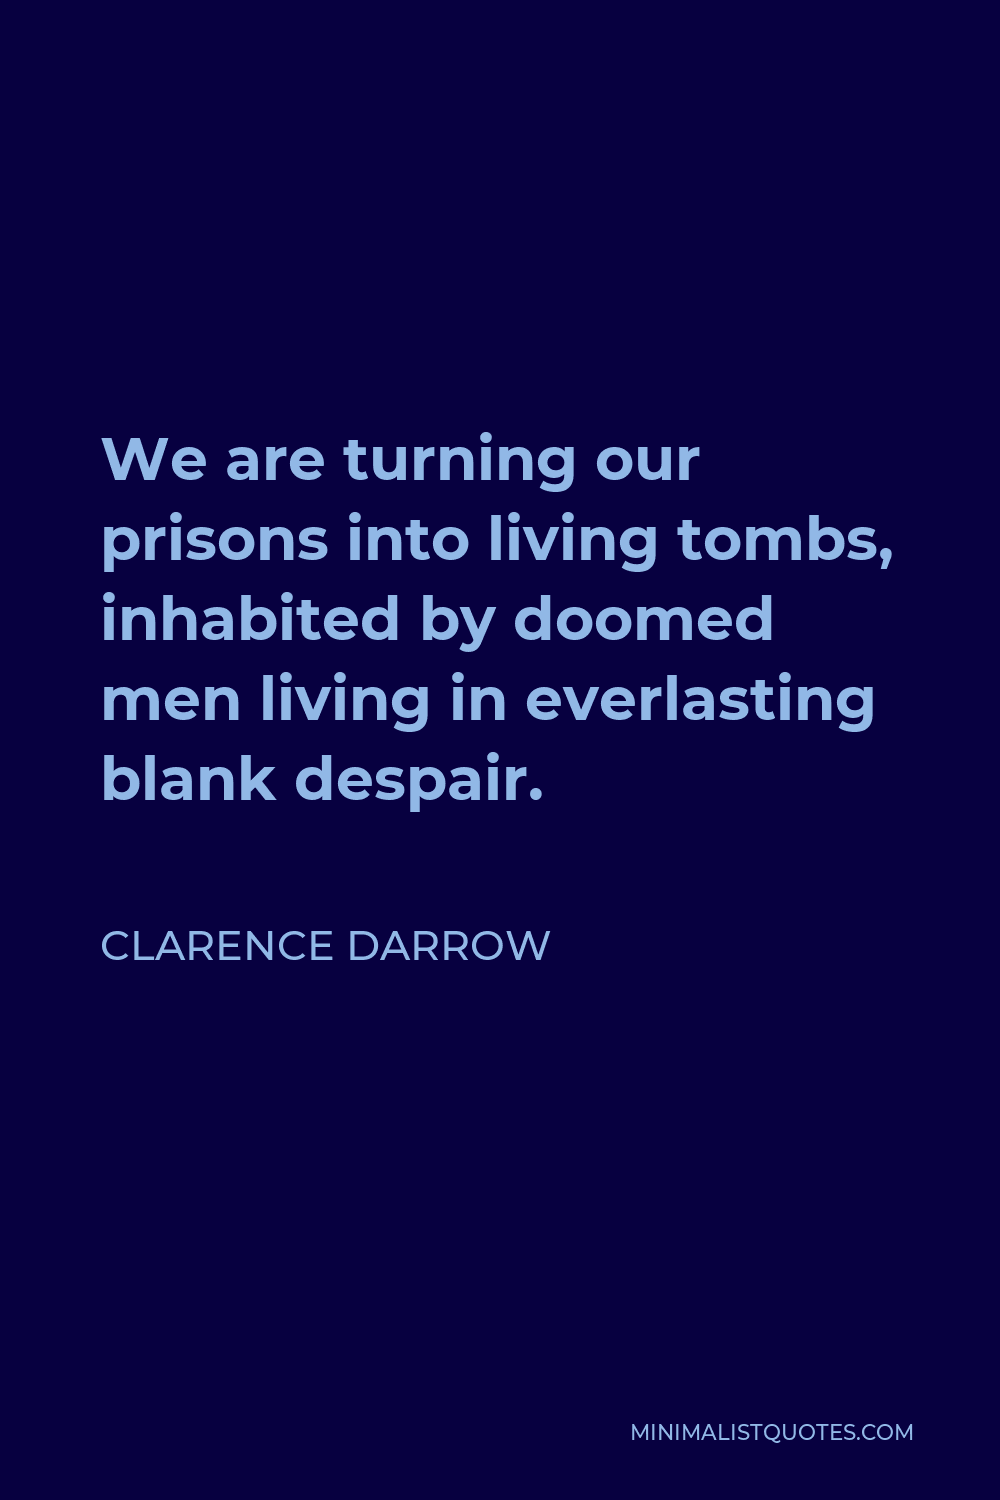 Clarence Darrow Quote - We are turning our prisons into living tombs, inhabited by doomed men living in everlasting blank despair.